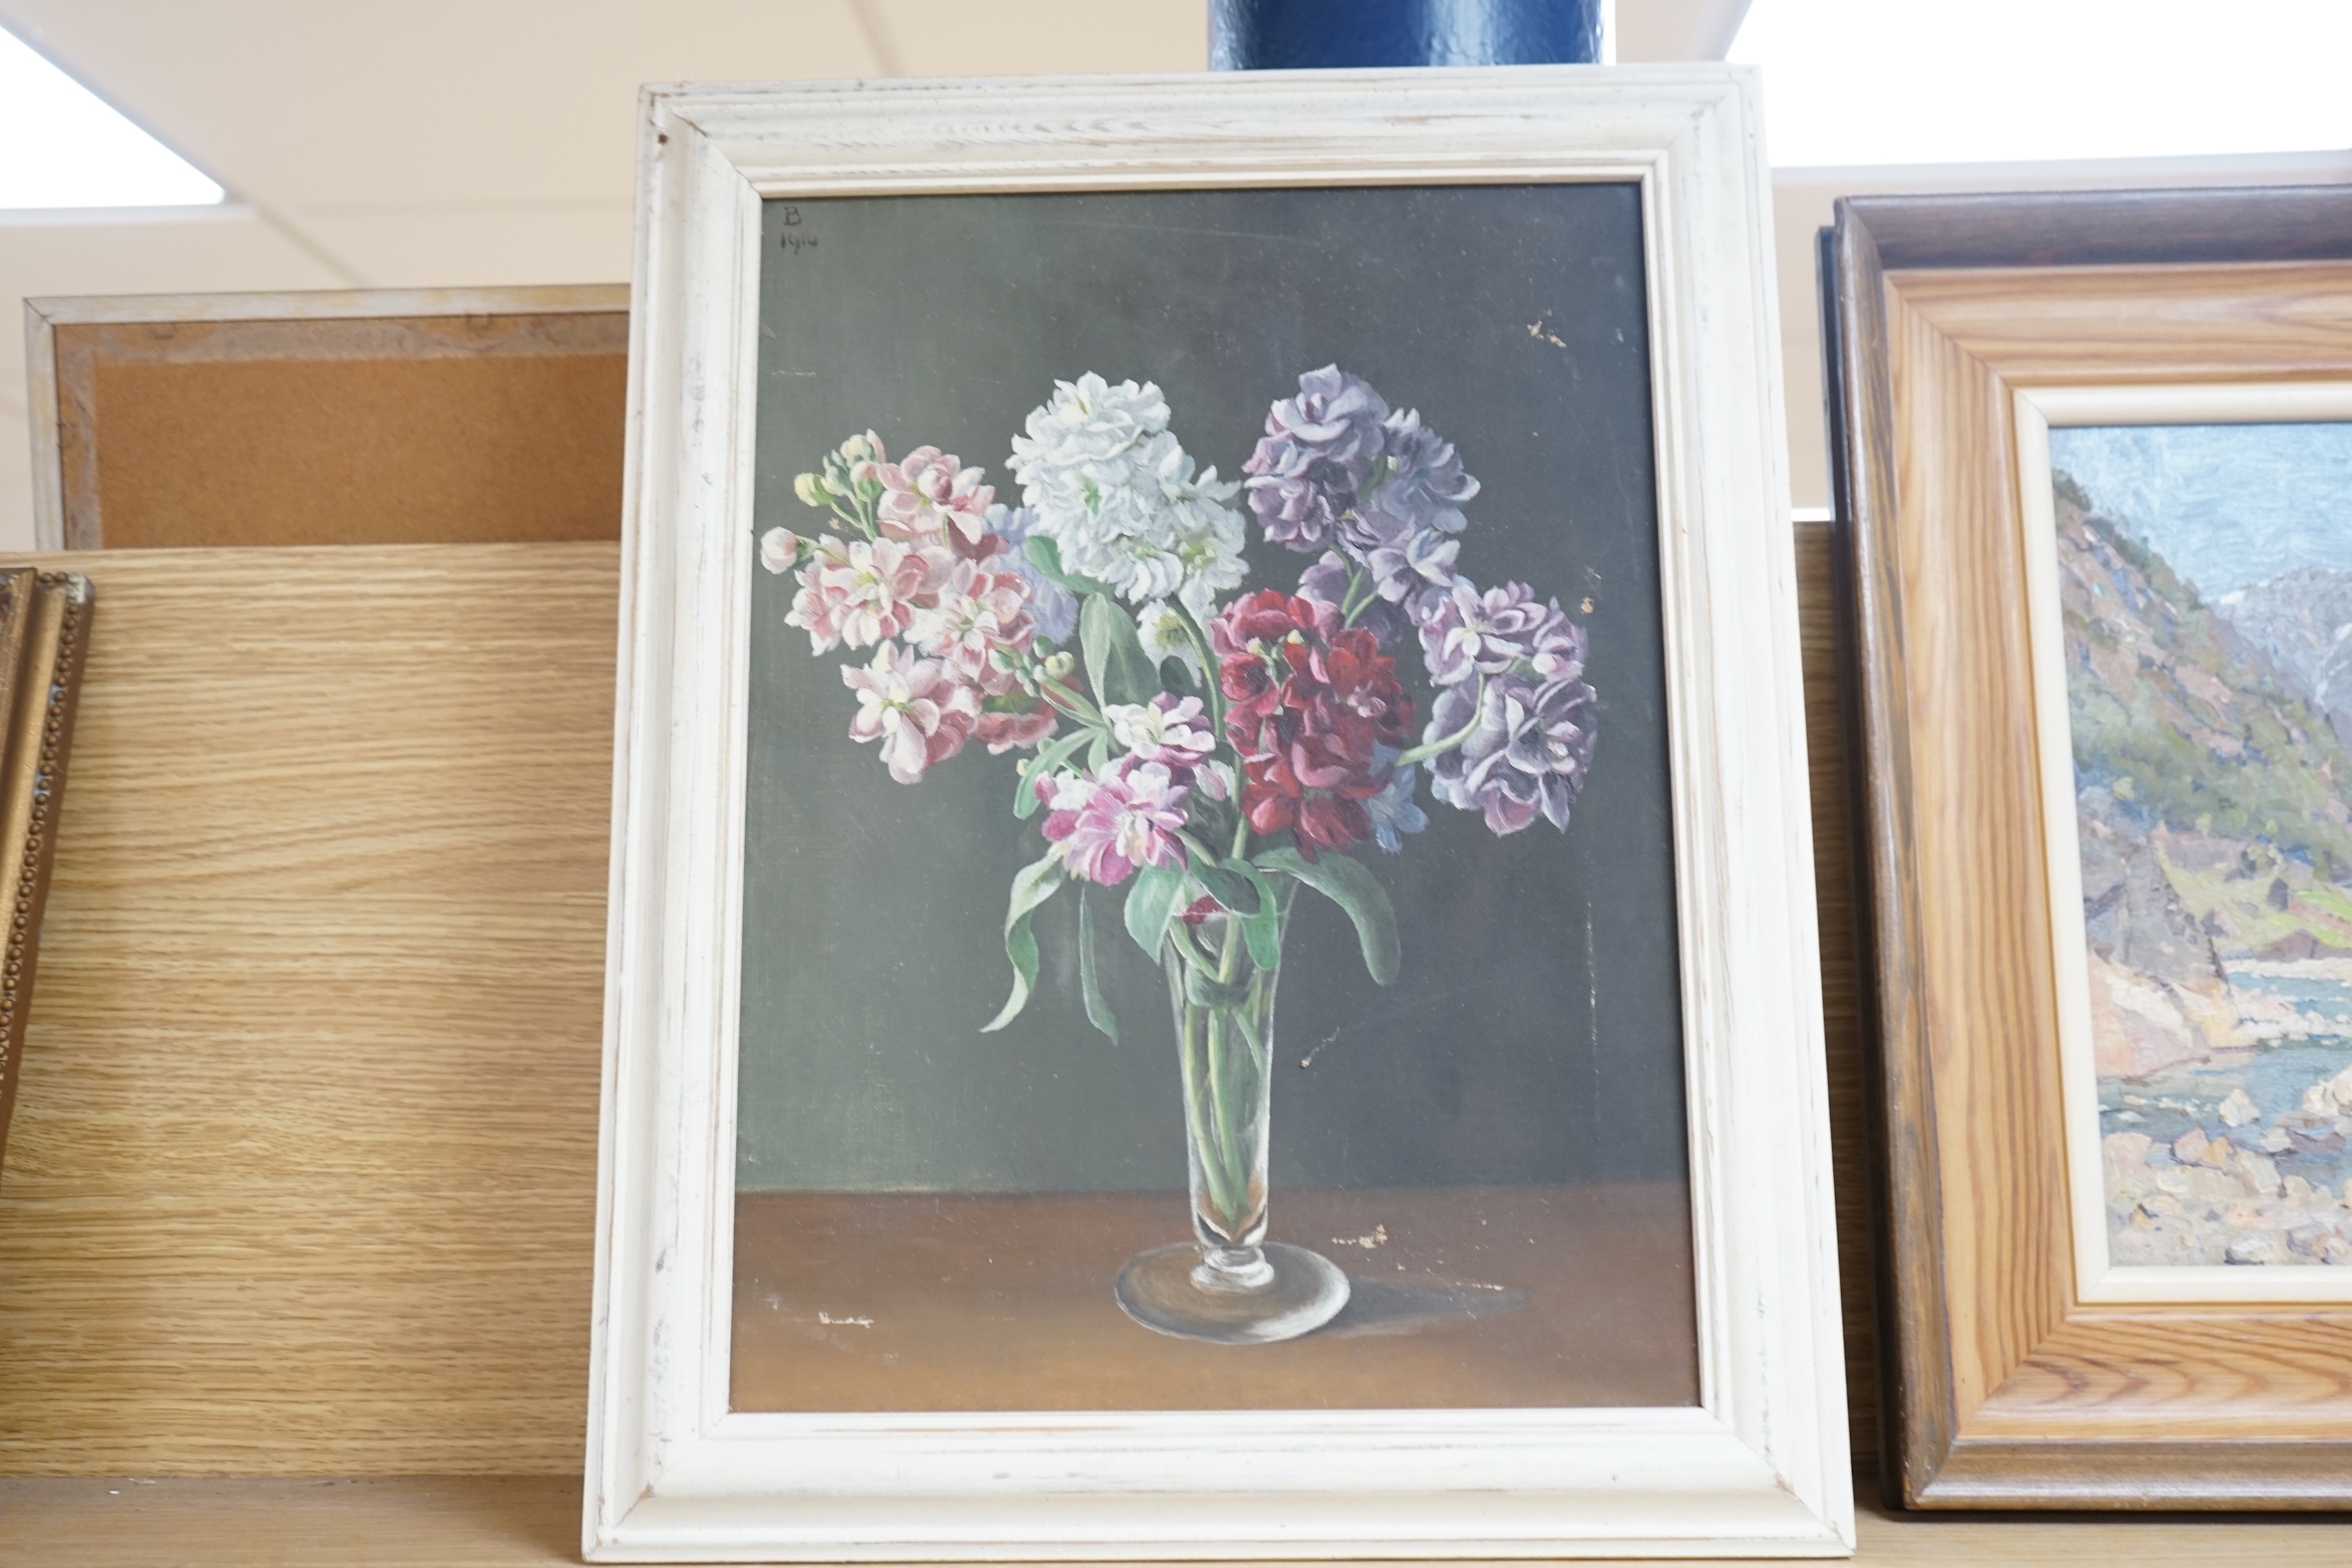 Charles Howson Bennett (1862-1940) oils on canvas, Still life of flowers, ‘Nature Study’, signed and dated 1910, details verso, together with a similar oil, one framed. Condition - poor to fair